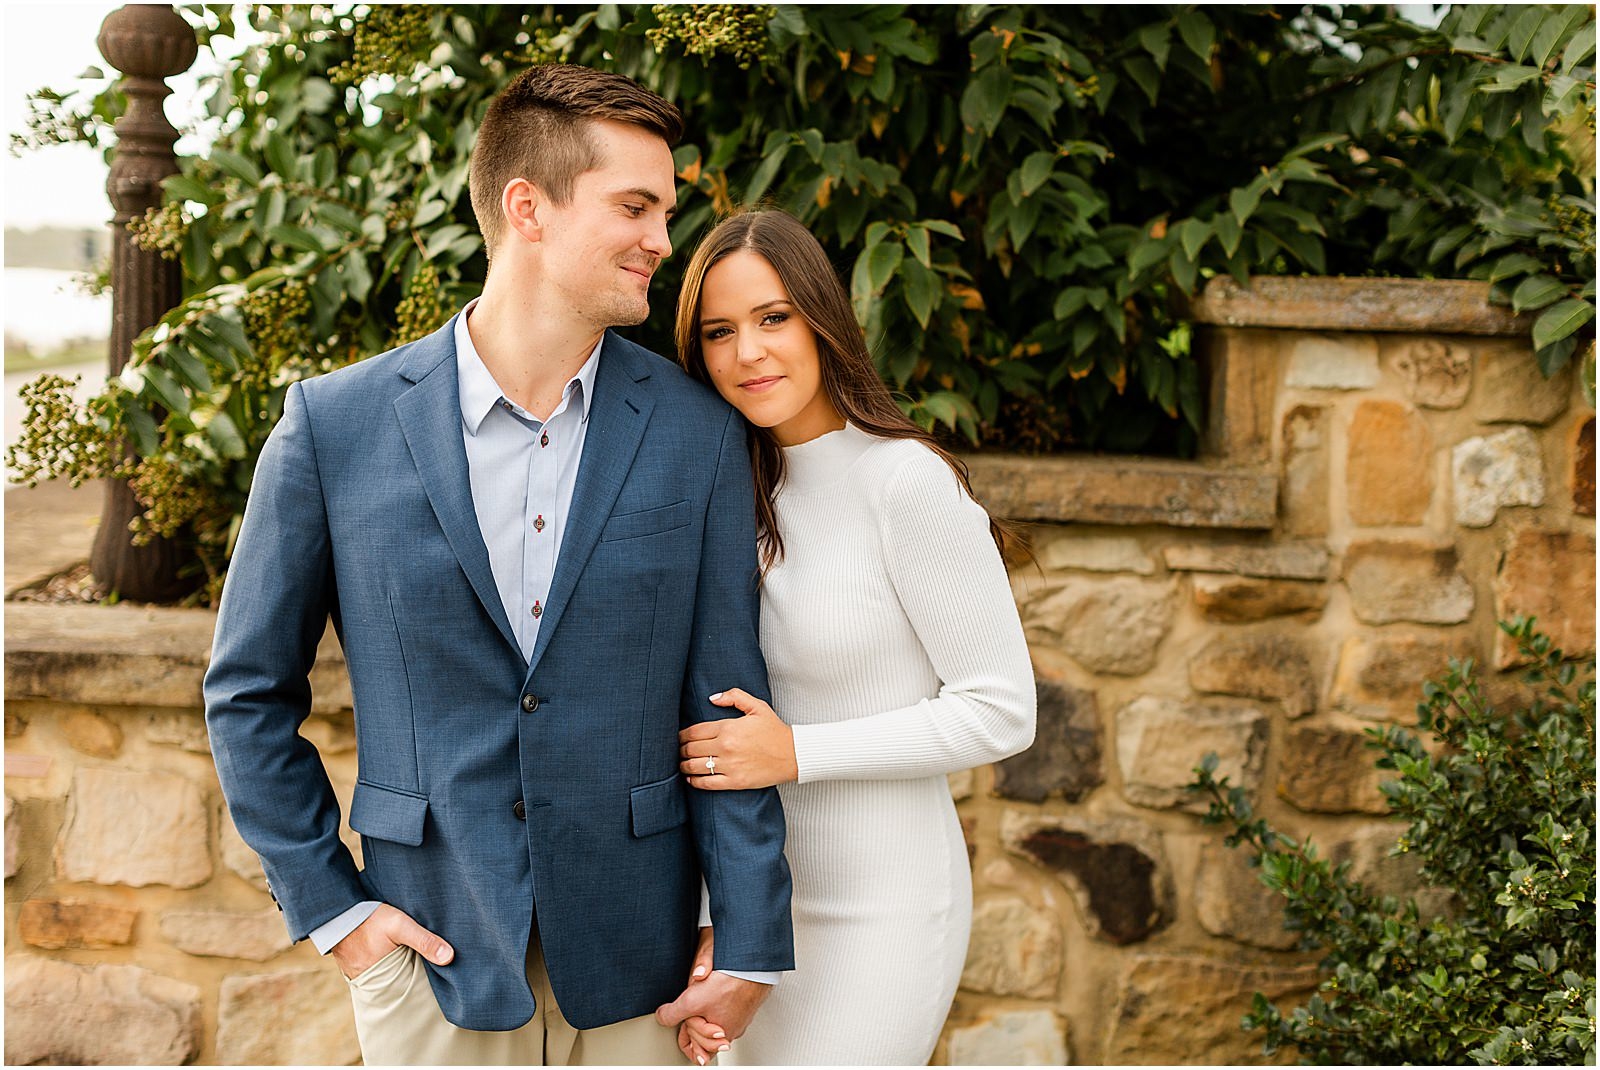 Emma and Jace's Downtown Newburgh Engagement Session | Bret and Brandie Photography | Evansville Indiana Wedding Photographers_0008.jpg